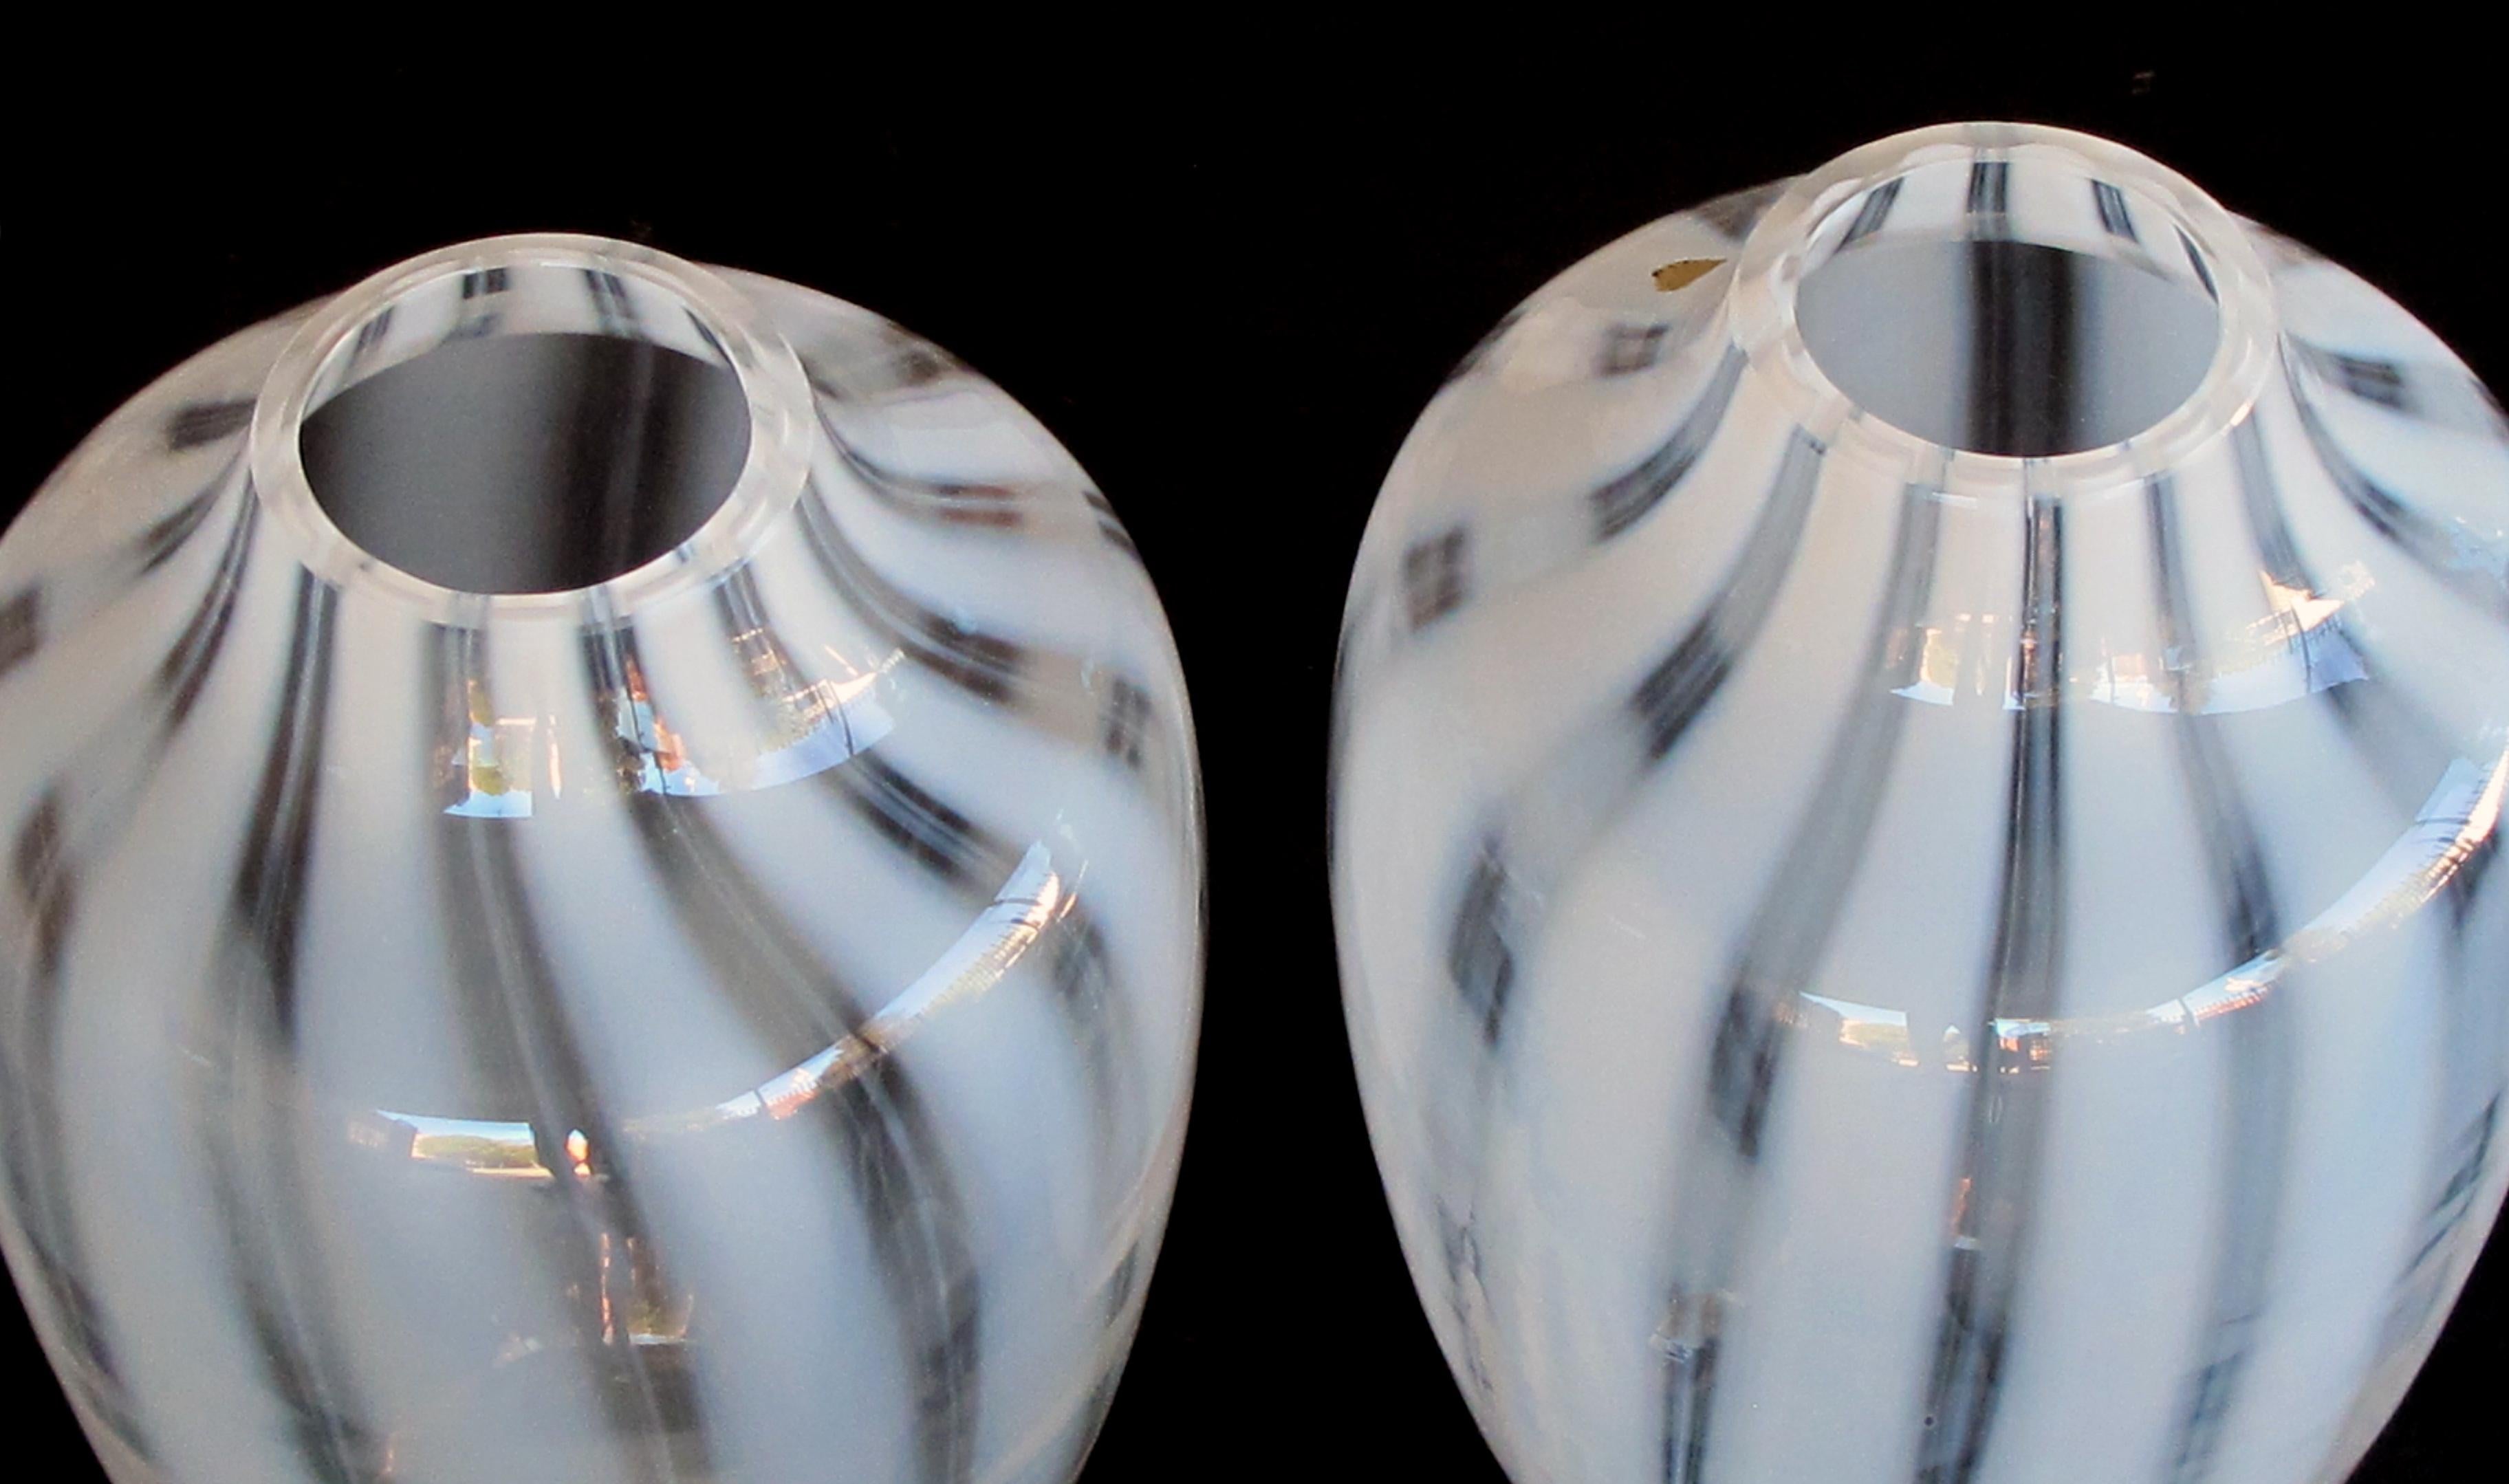 A large-scaled and striking pair of Hessen Glaswerke midcentury white striated ovoid vases (West Germany); each tall vase of ovoid form with short neck above an ovoid body; the luminous glass with subtle white streaking; with foil labels.